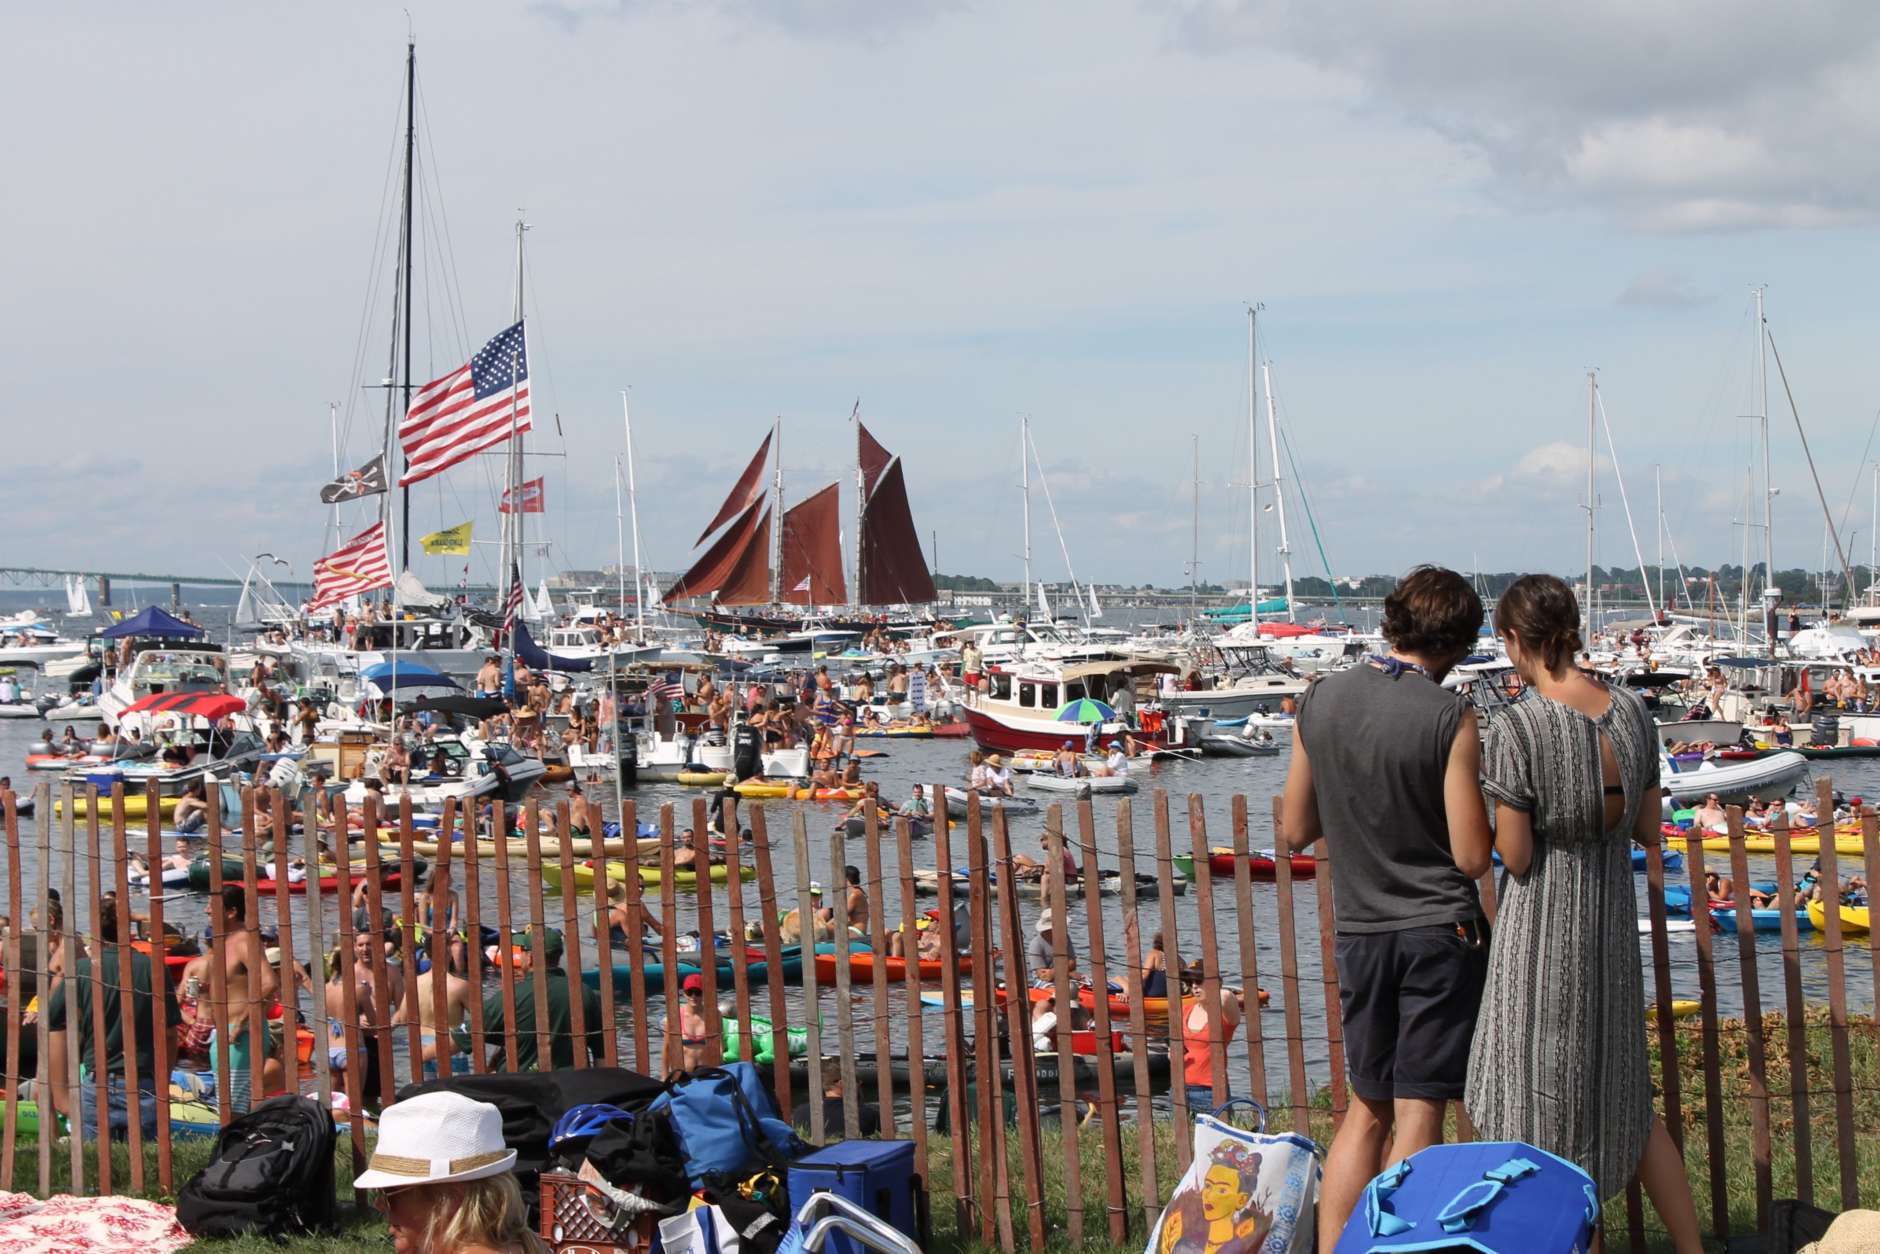 Attendees at the Newport Folk Festival look out at the harbor Saturday, July 25, 2015, during the second day of the three-day festival at Fort Adams State Park in Newport, R.I. (AP Photo/Michelle R. Smith)